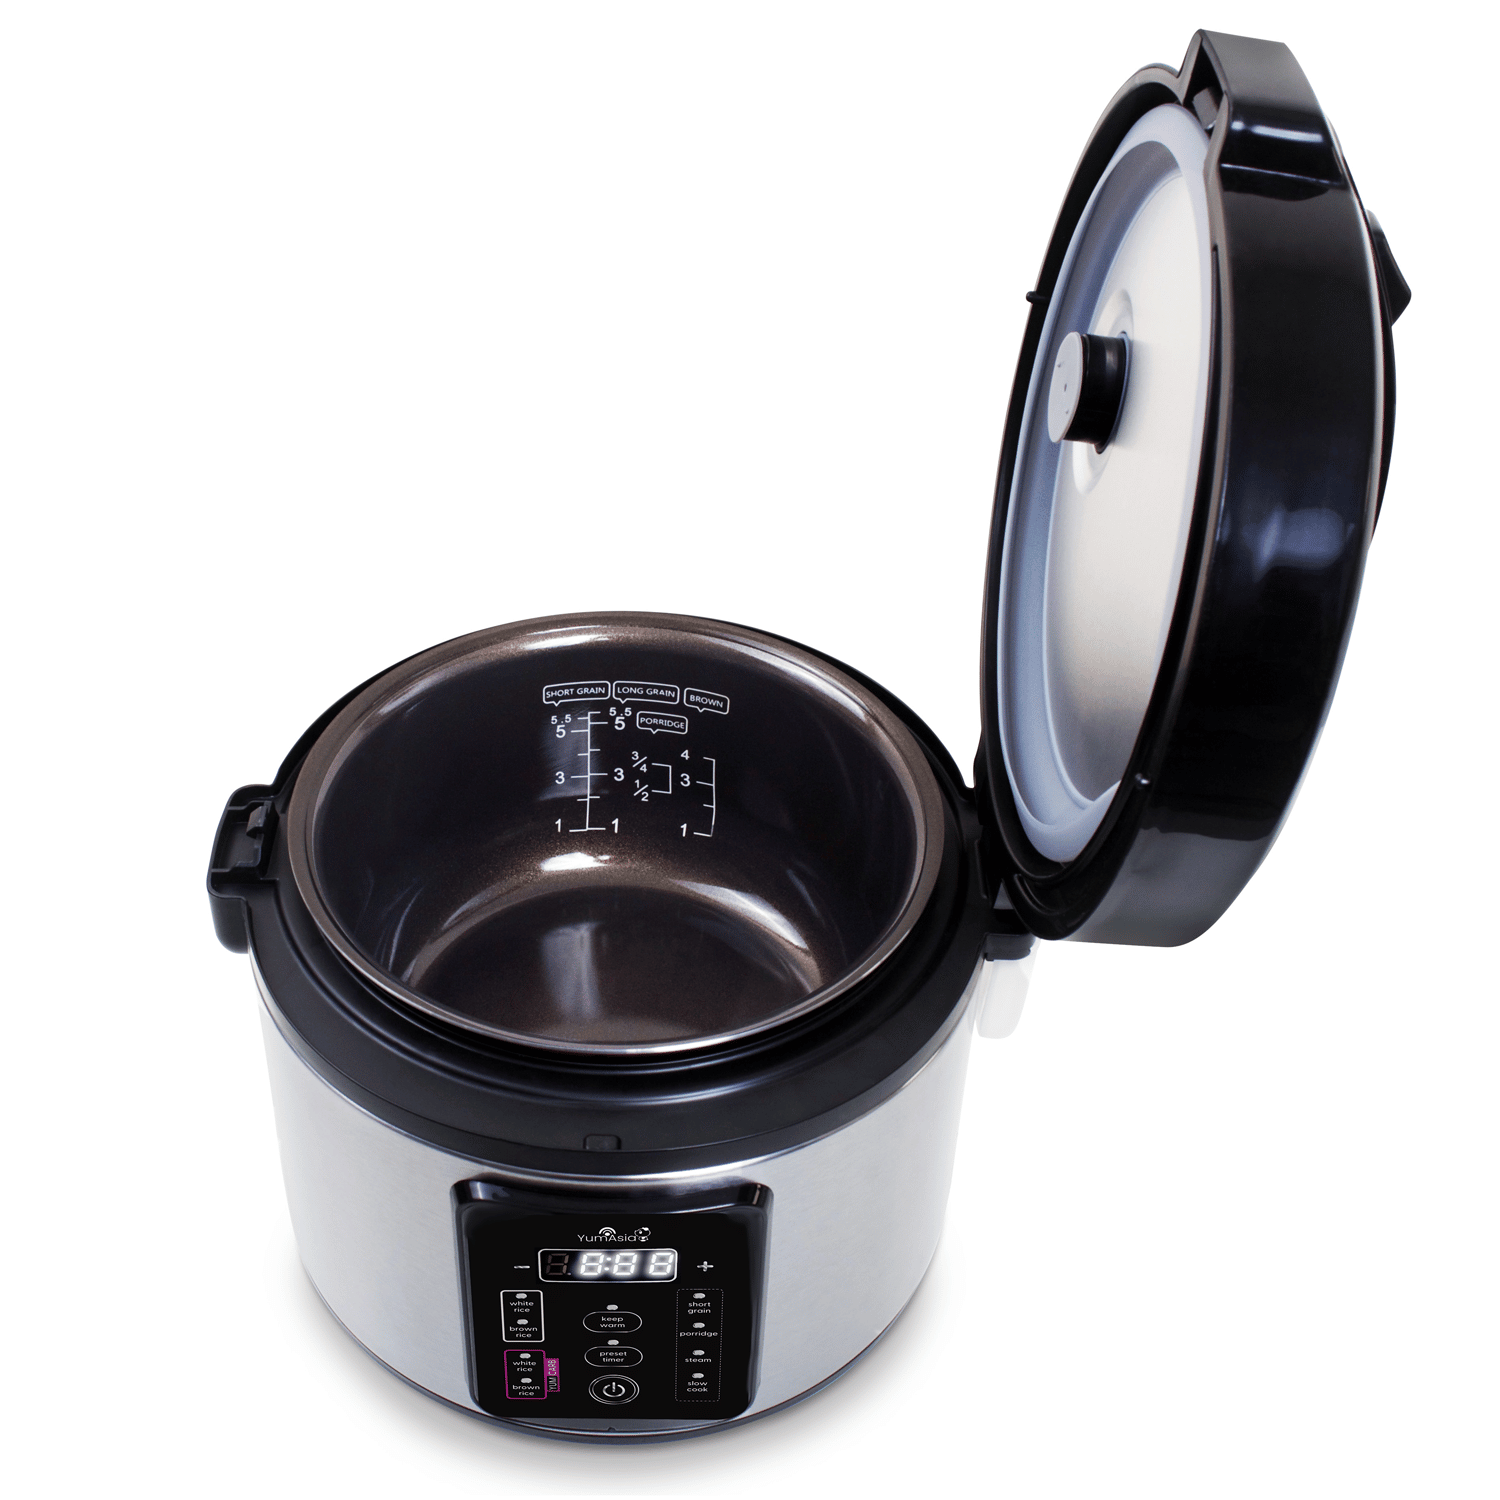  YumAsia 3.5-Cup Mini Rice Cooker with Ceramic Bowl